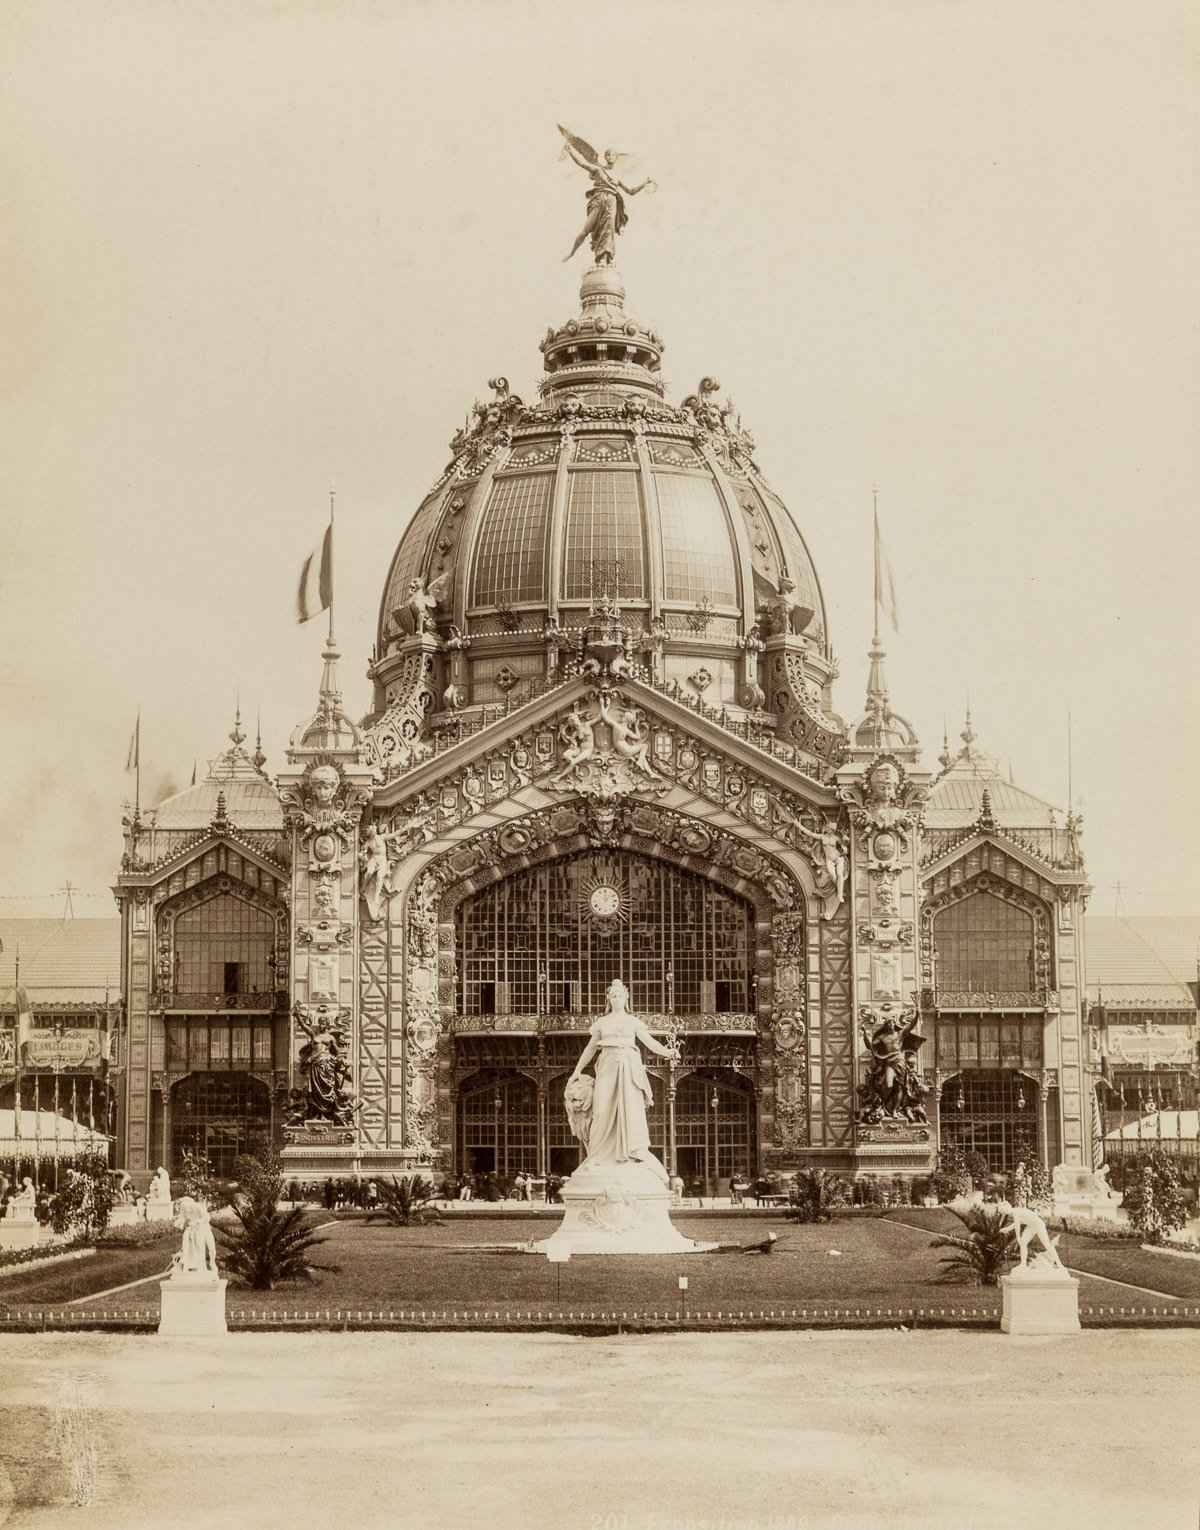 The Central Dome of the exhibition